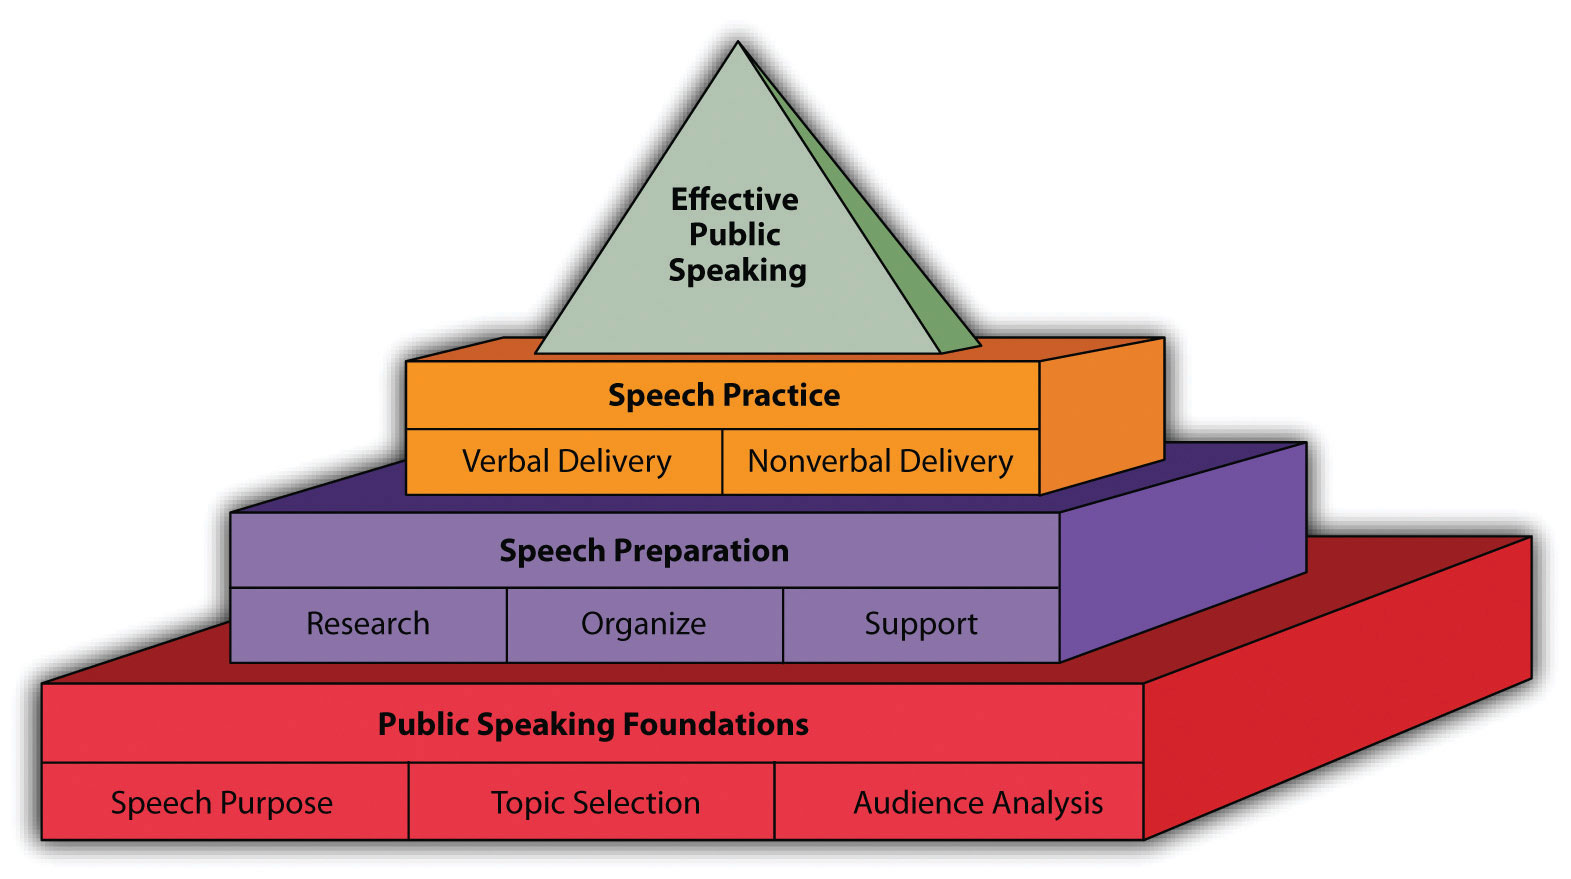 Public Speaking Pyramid: Speech Practice (Verbal and Nonverbal Delivery), Speech Preparation (Research, Organize, and Support), and Public Speaking Foundations (Speech Purpose, Topic Selection, and Audience Analysis).